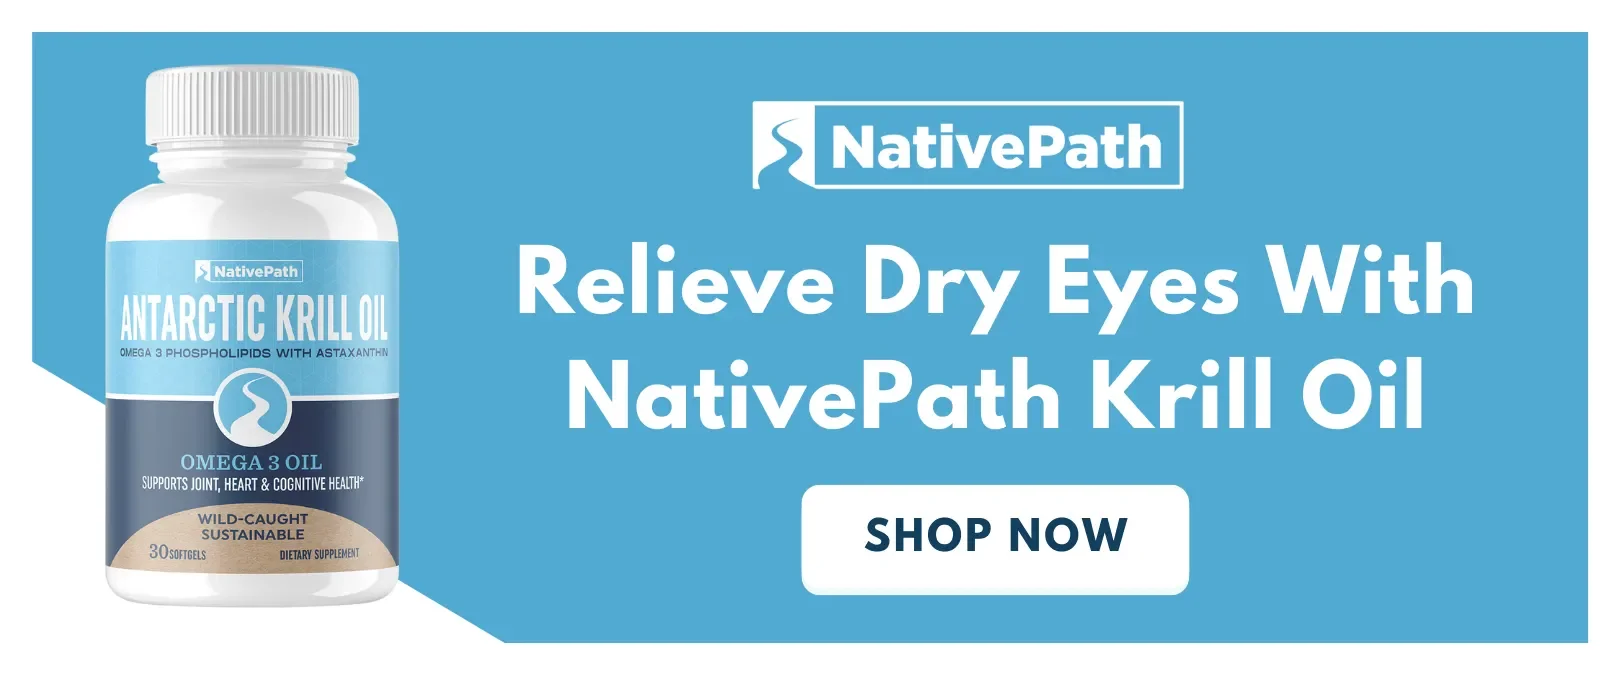 Dry Eyes? Supplement With NativePath Krill Oil